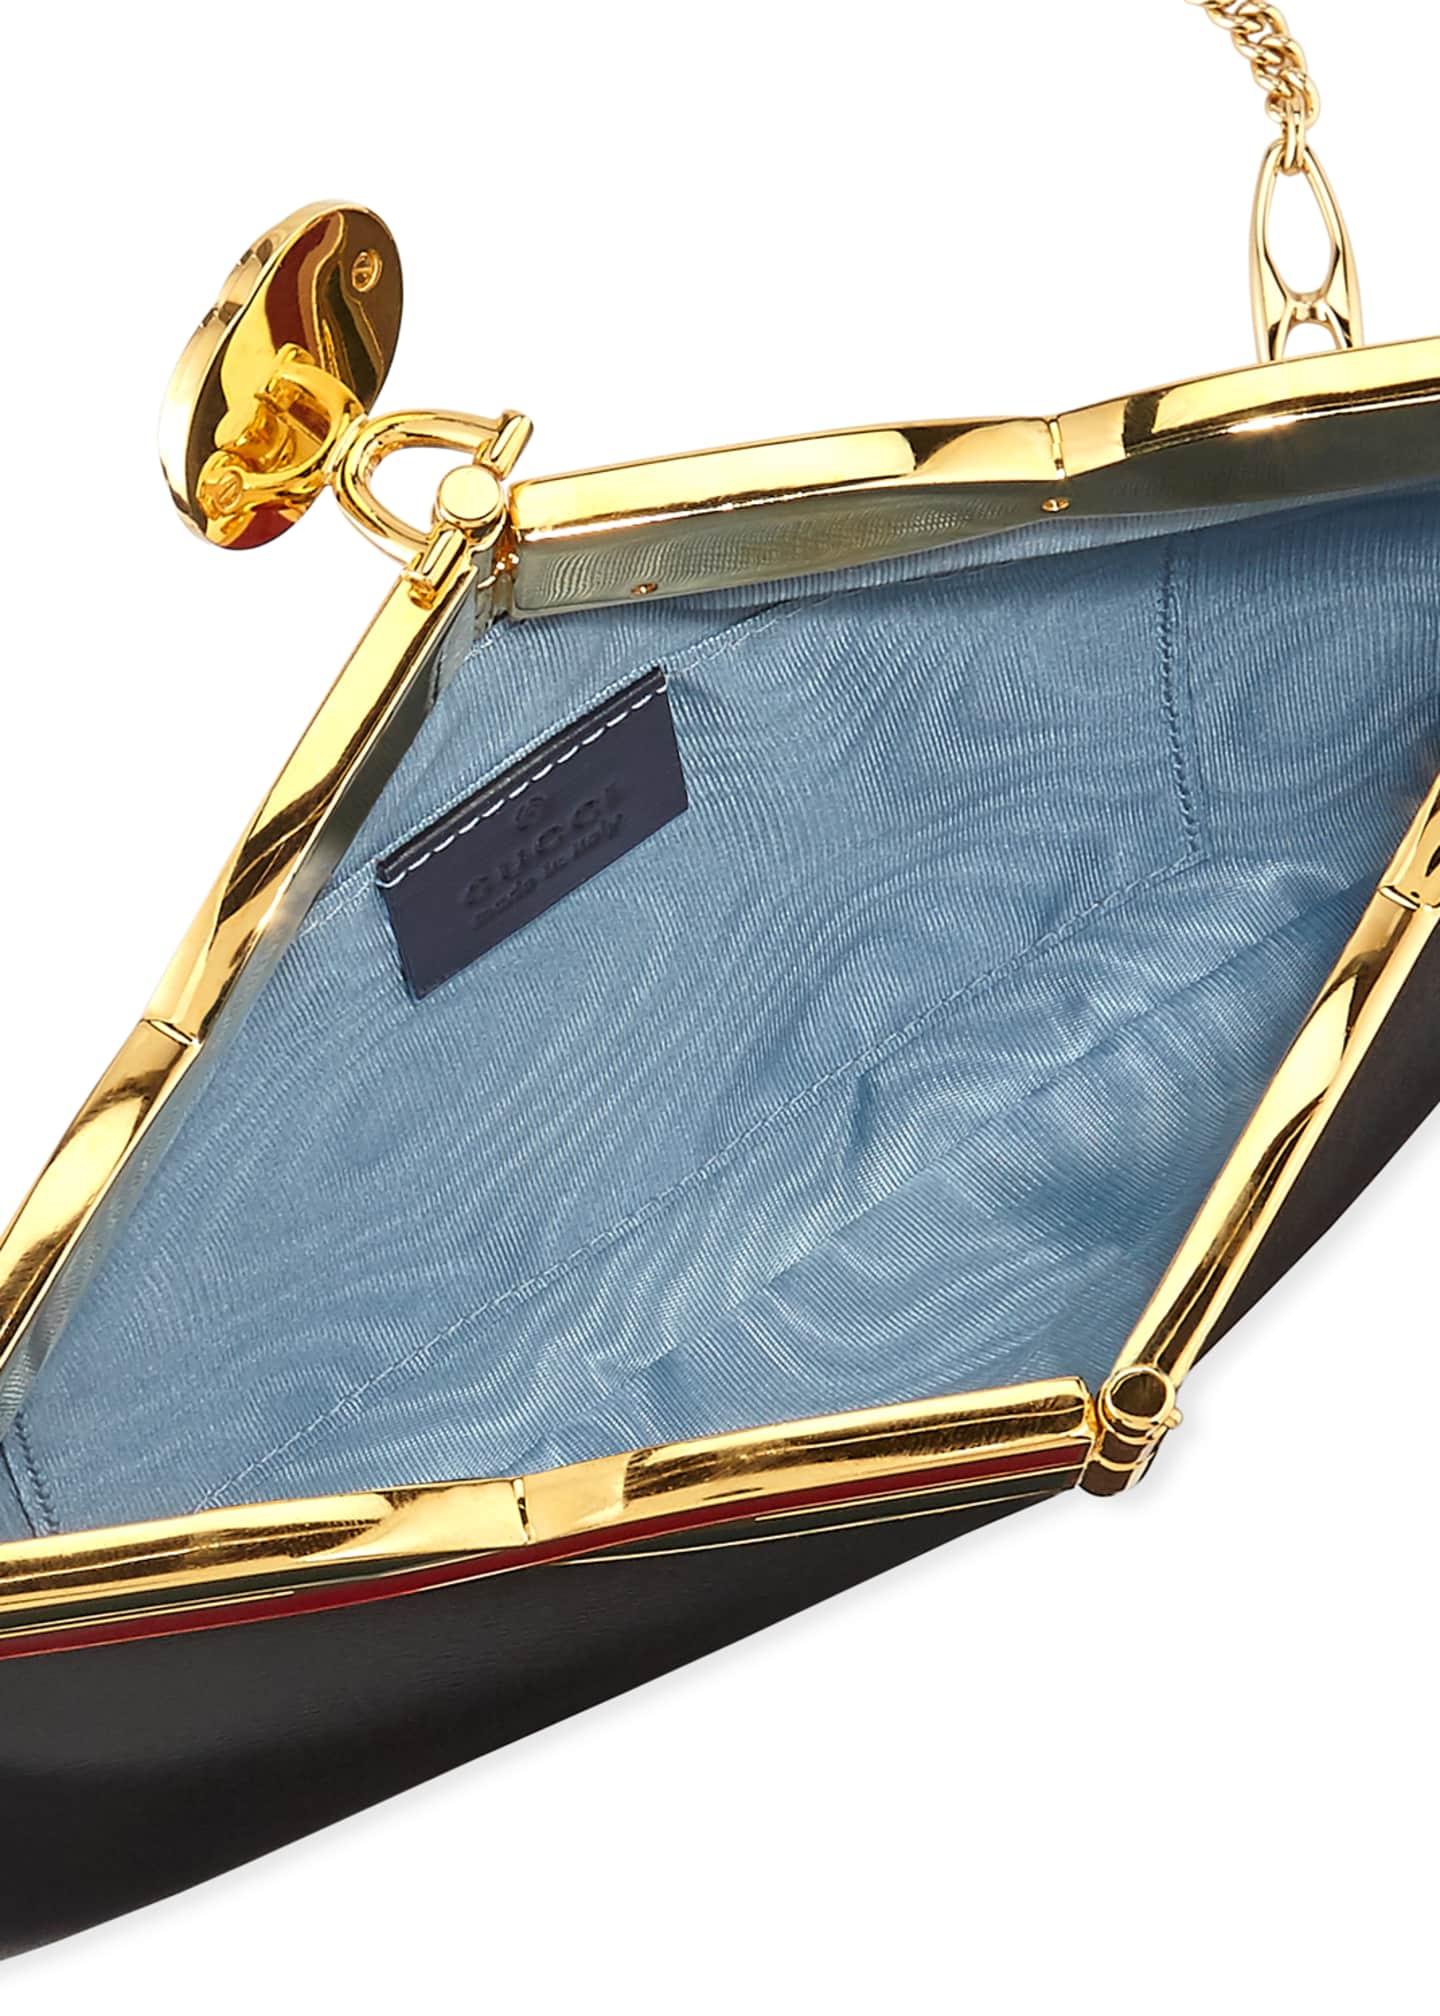 Gucci Broadway Evening Palm Lux Leather Clutch Bag in Black - Lyst